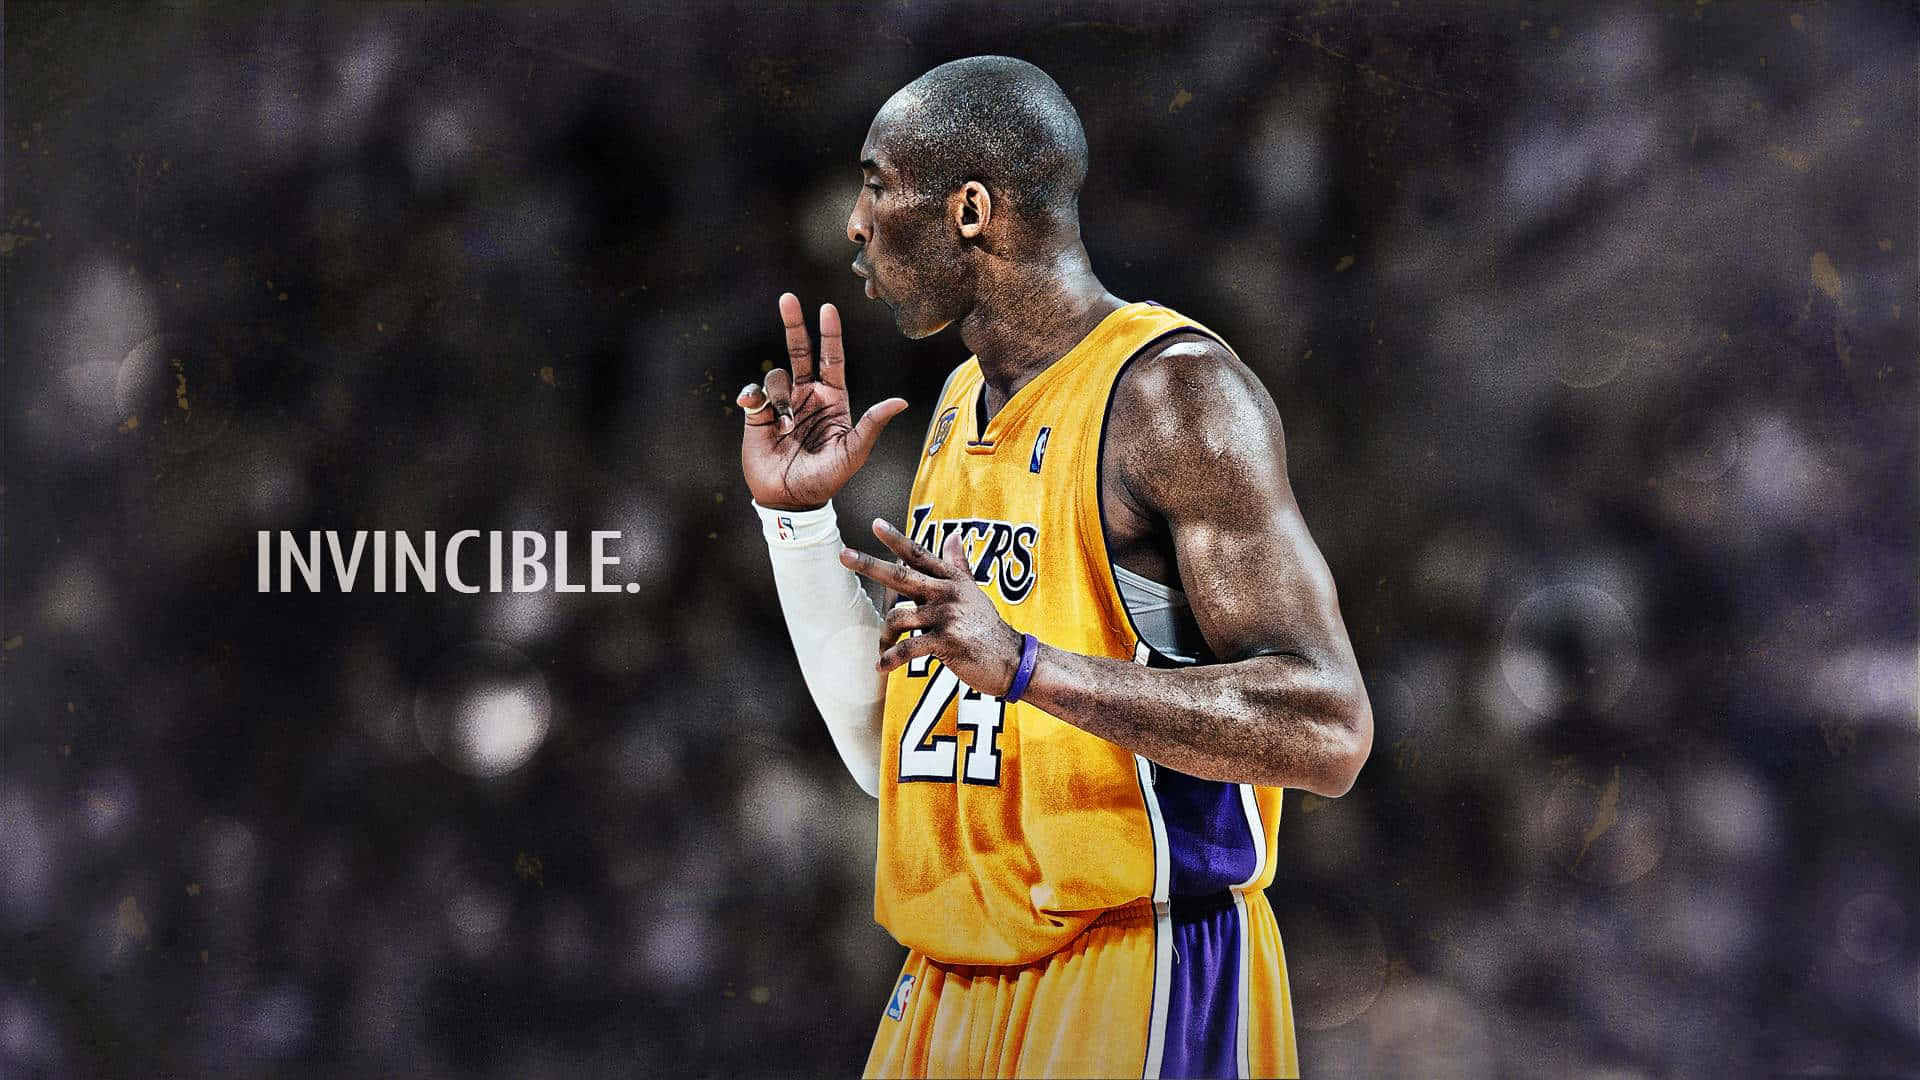 Kobe Bryant Inspires Athletes To Reach For Their Full Potential